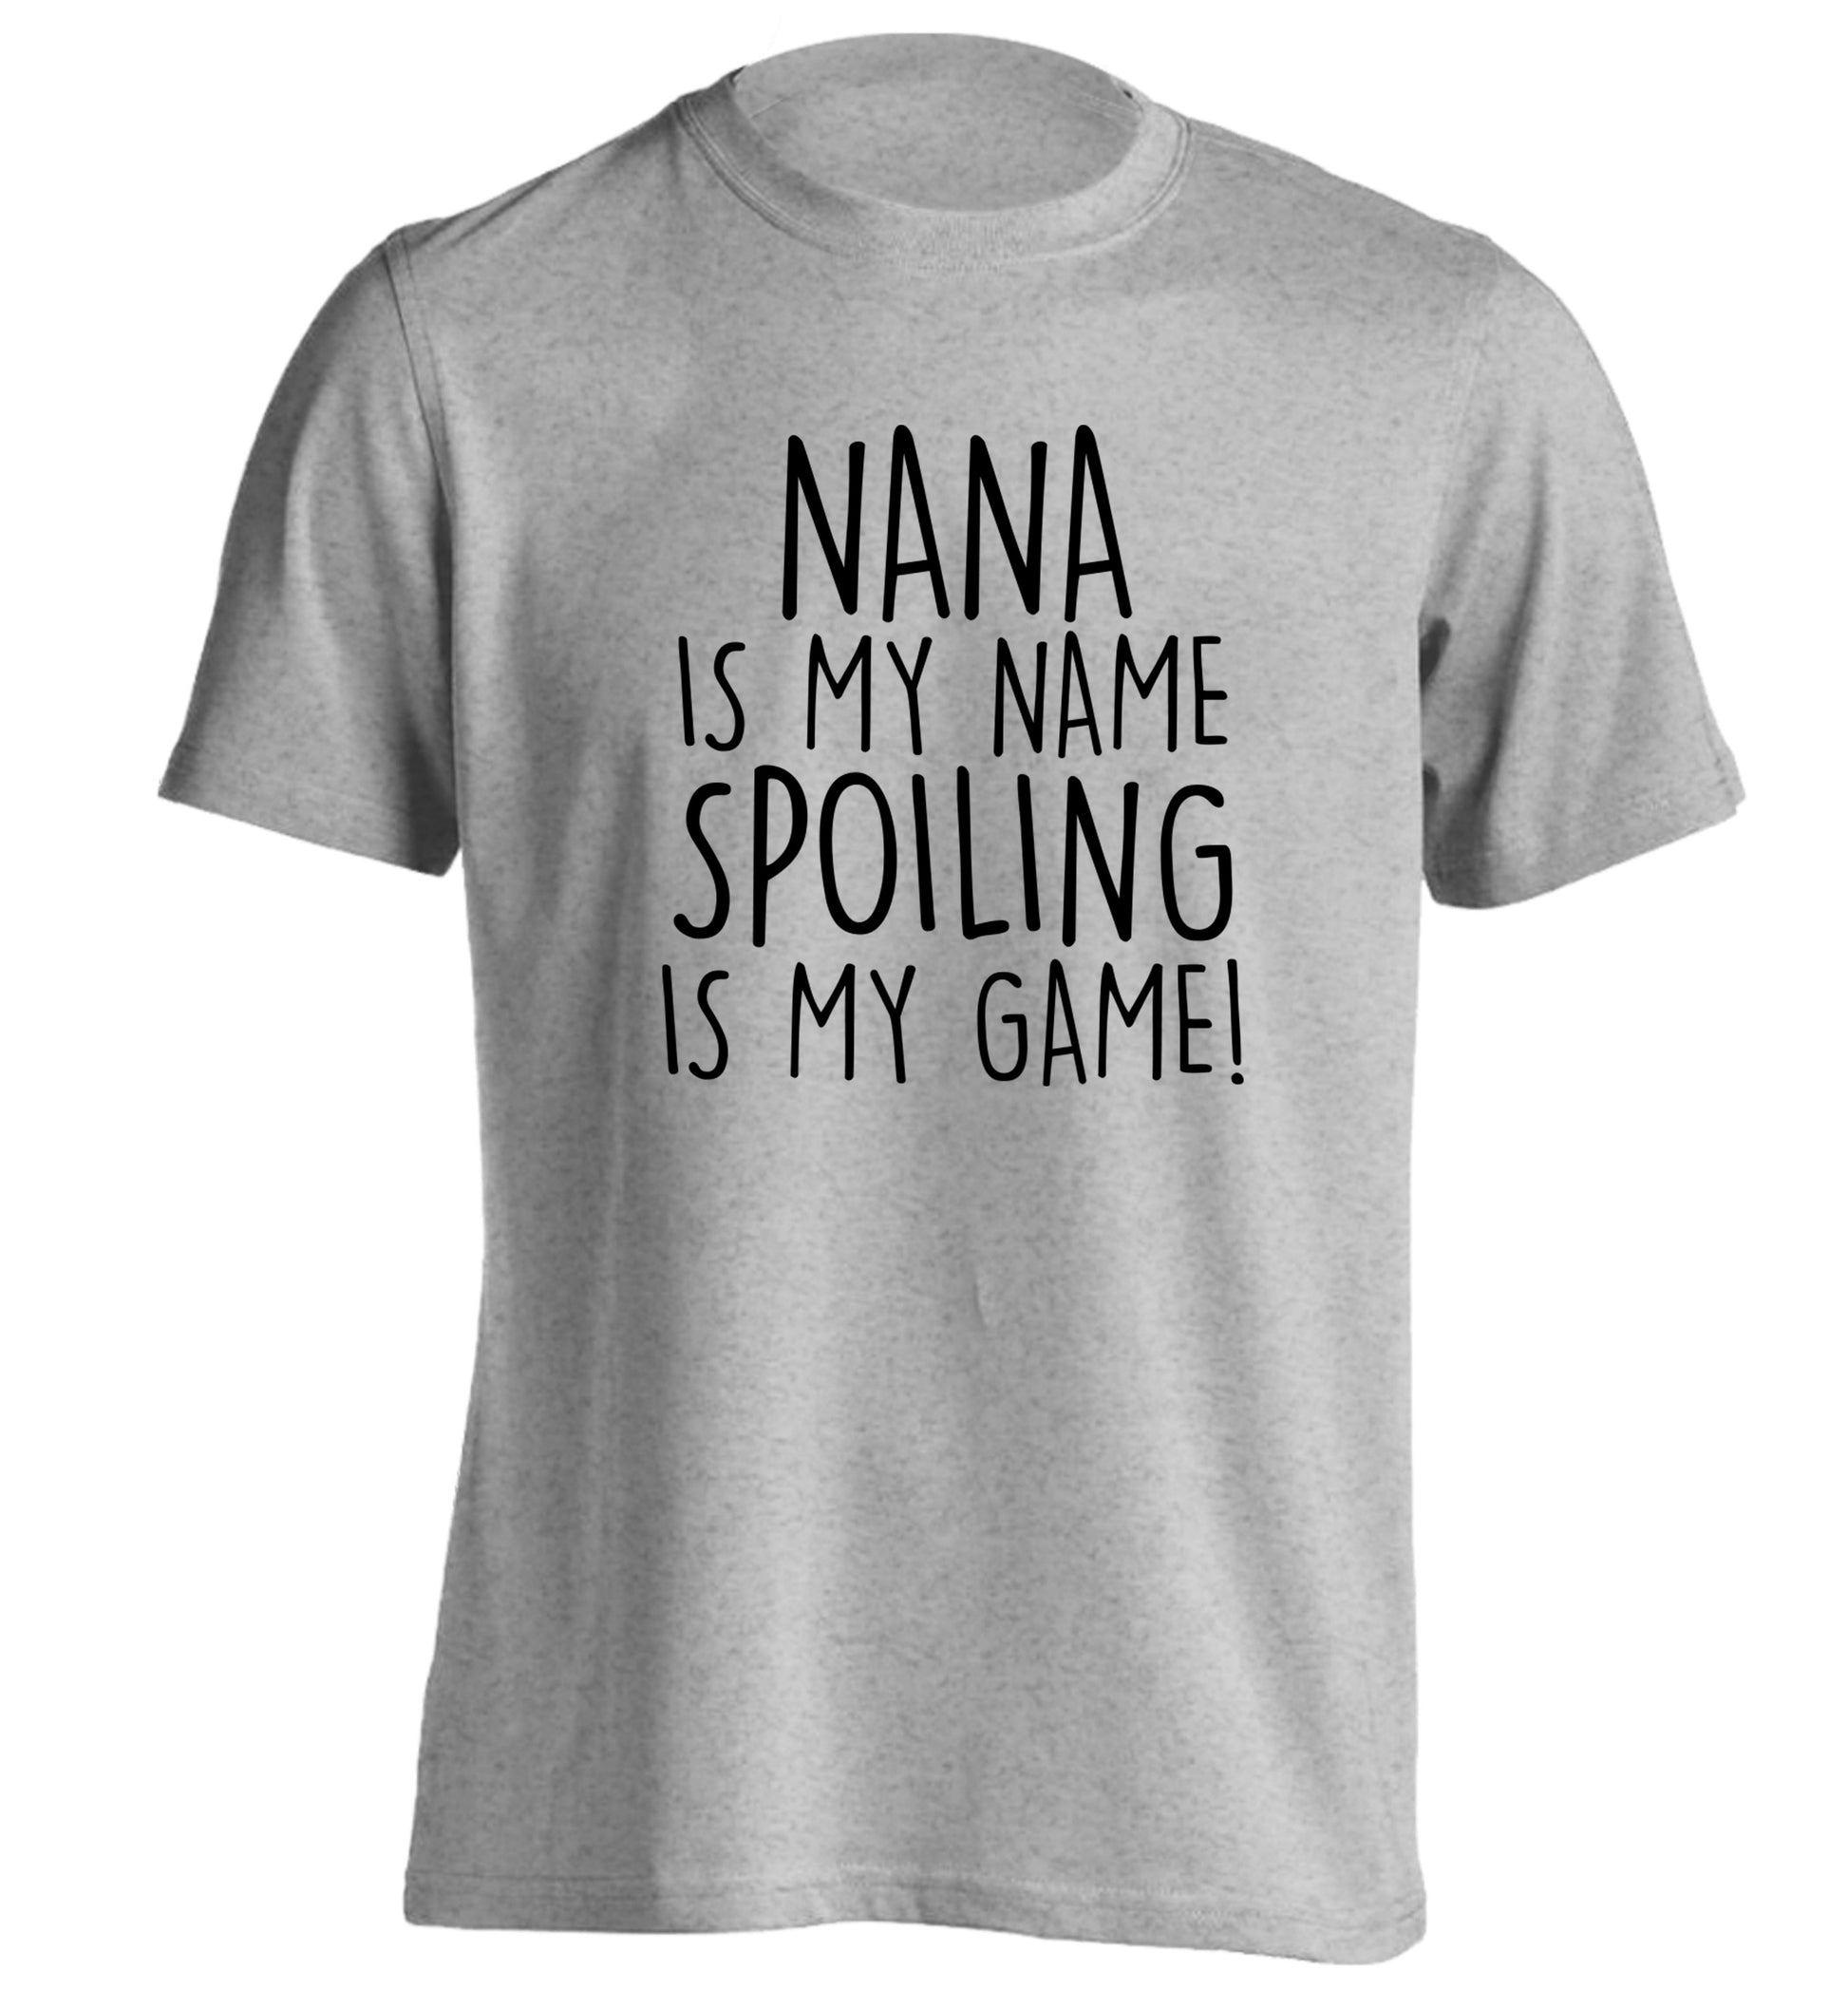 Nana is my name, spoiling is my game adults unisex grey Tshirt 2XL